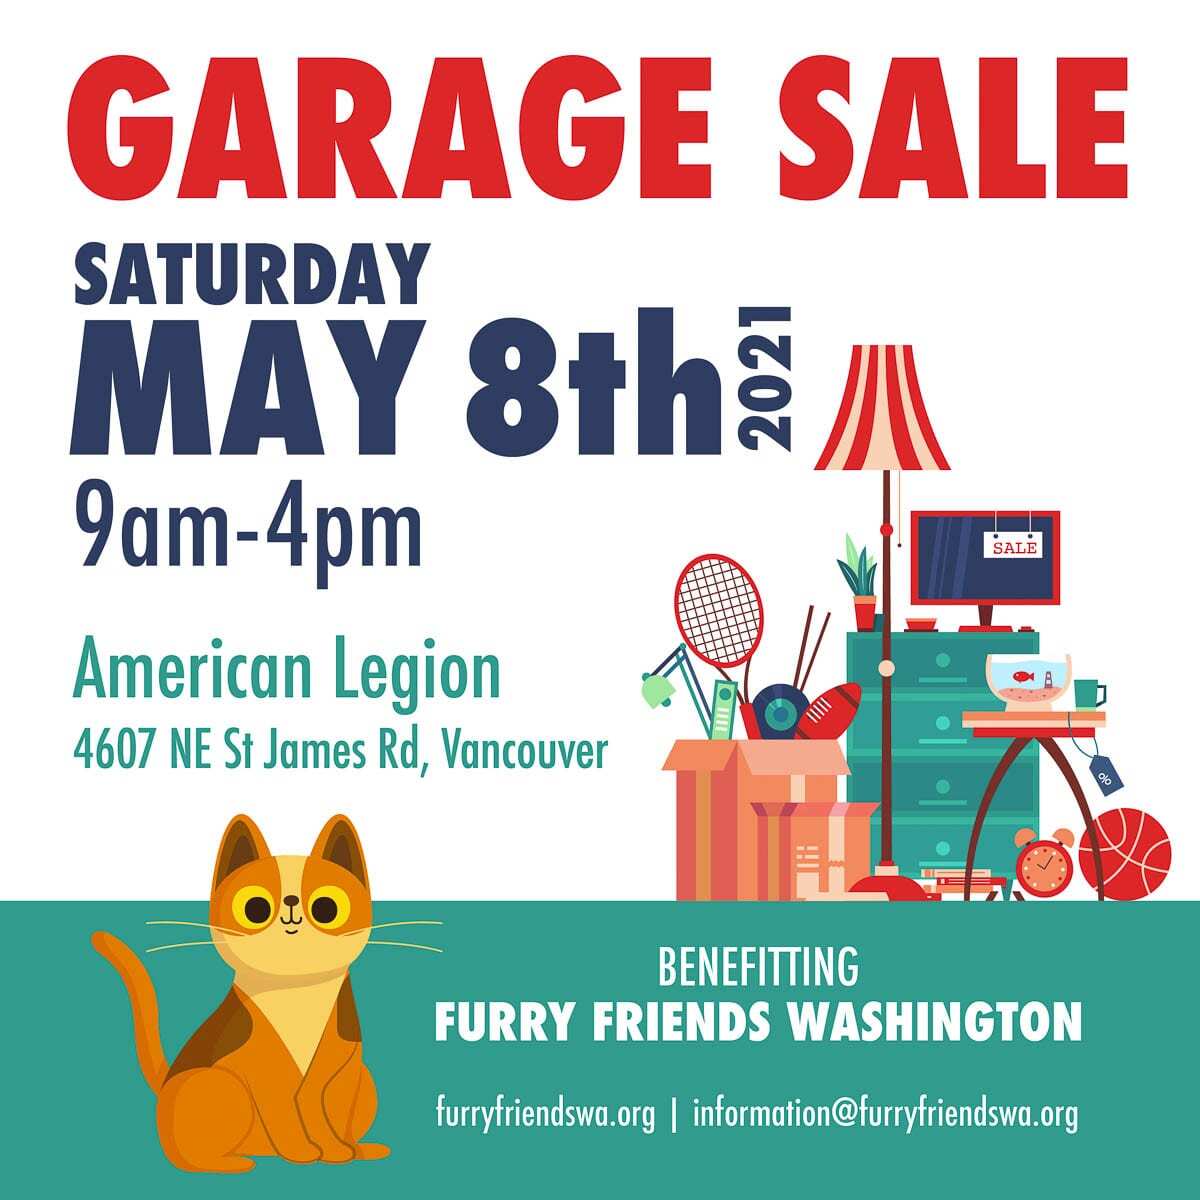 The festivities will begin at 9 a.m. on Sat., May 8 and will end at 4 p.m. at the American Legion located at 4607 NE St James Road, Vancouver.